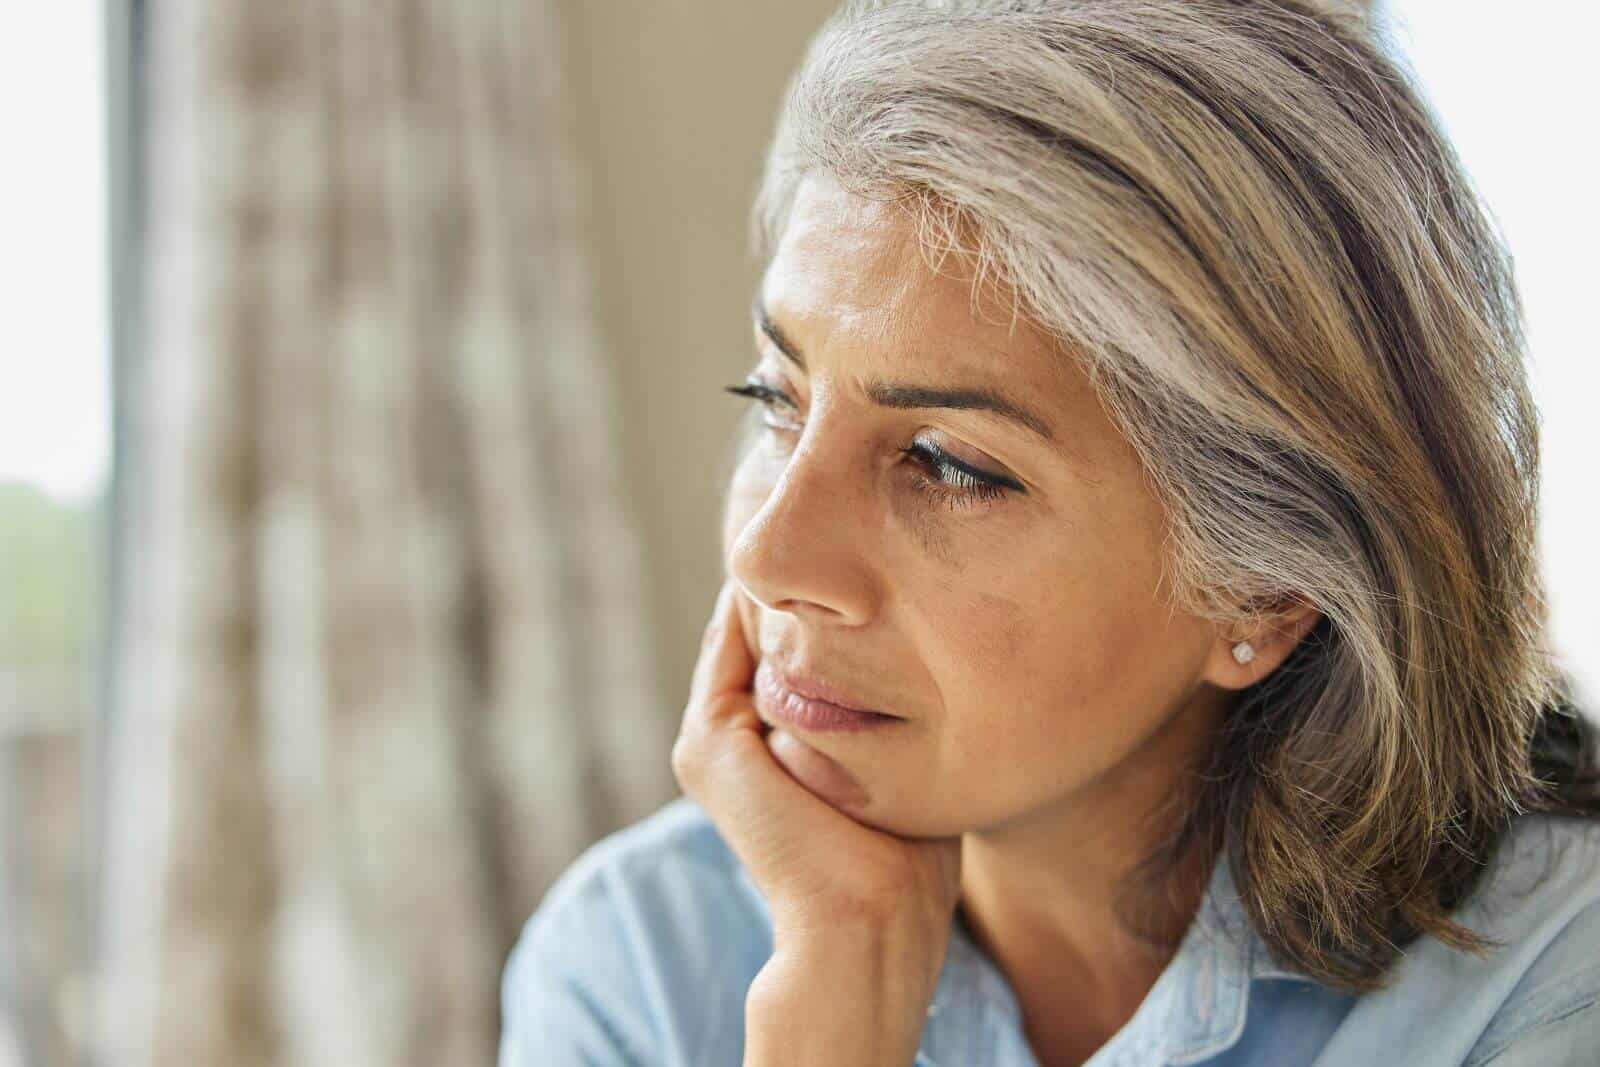 The link between hearing loss and loneliness